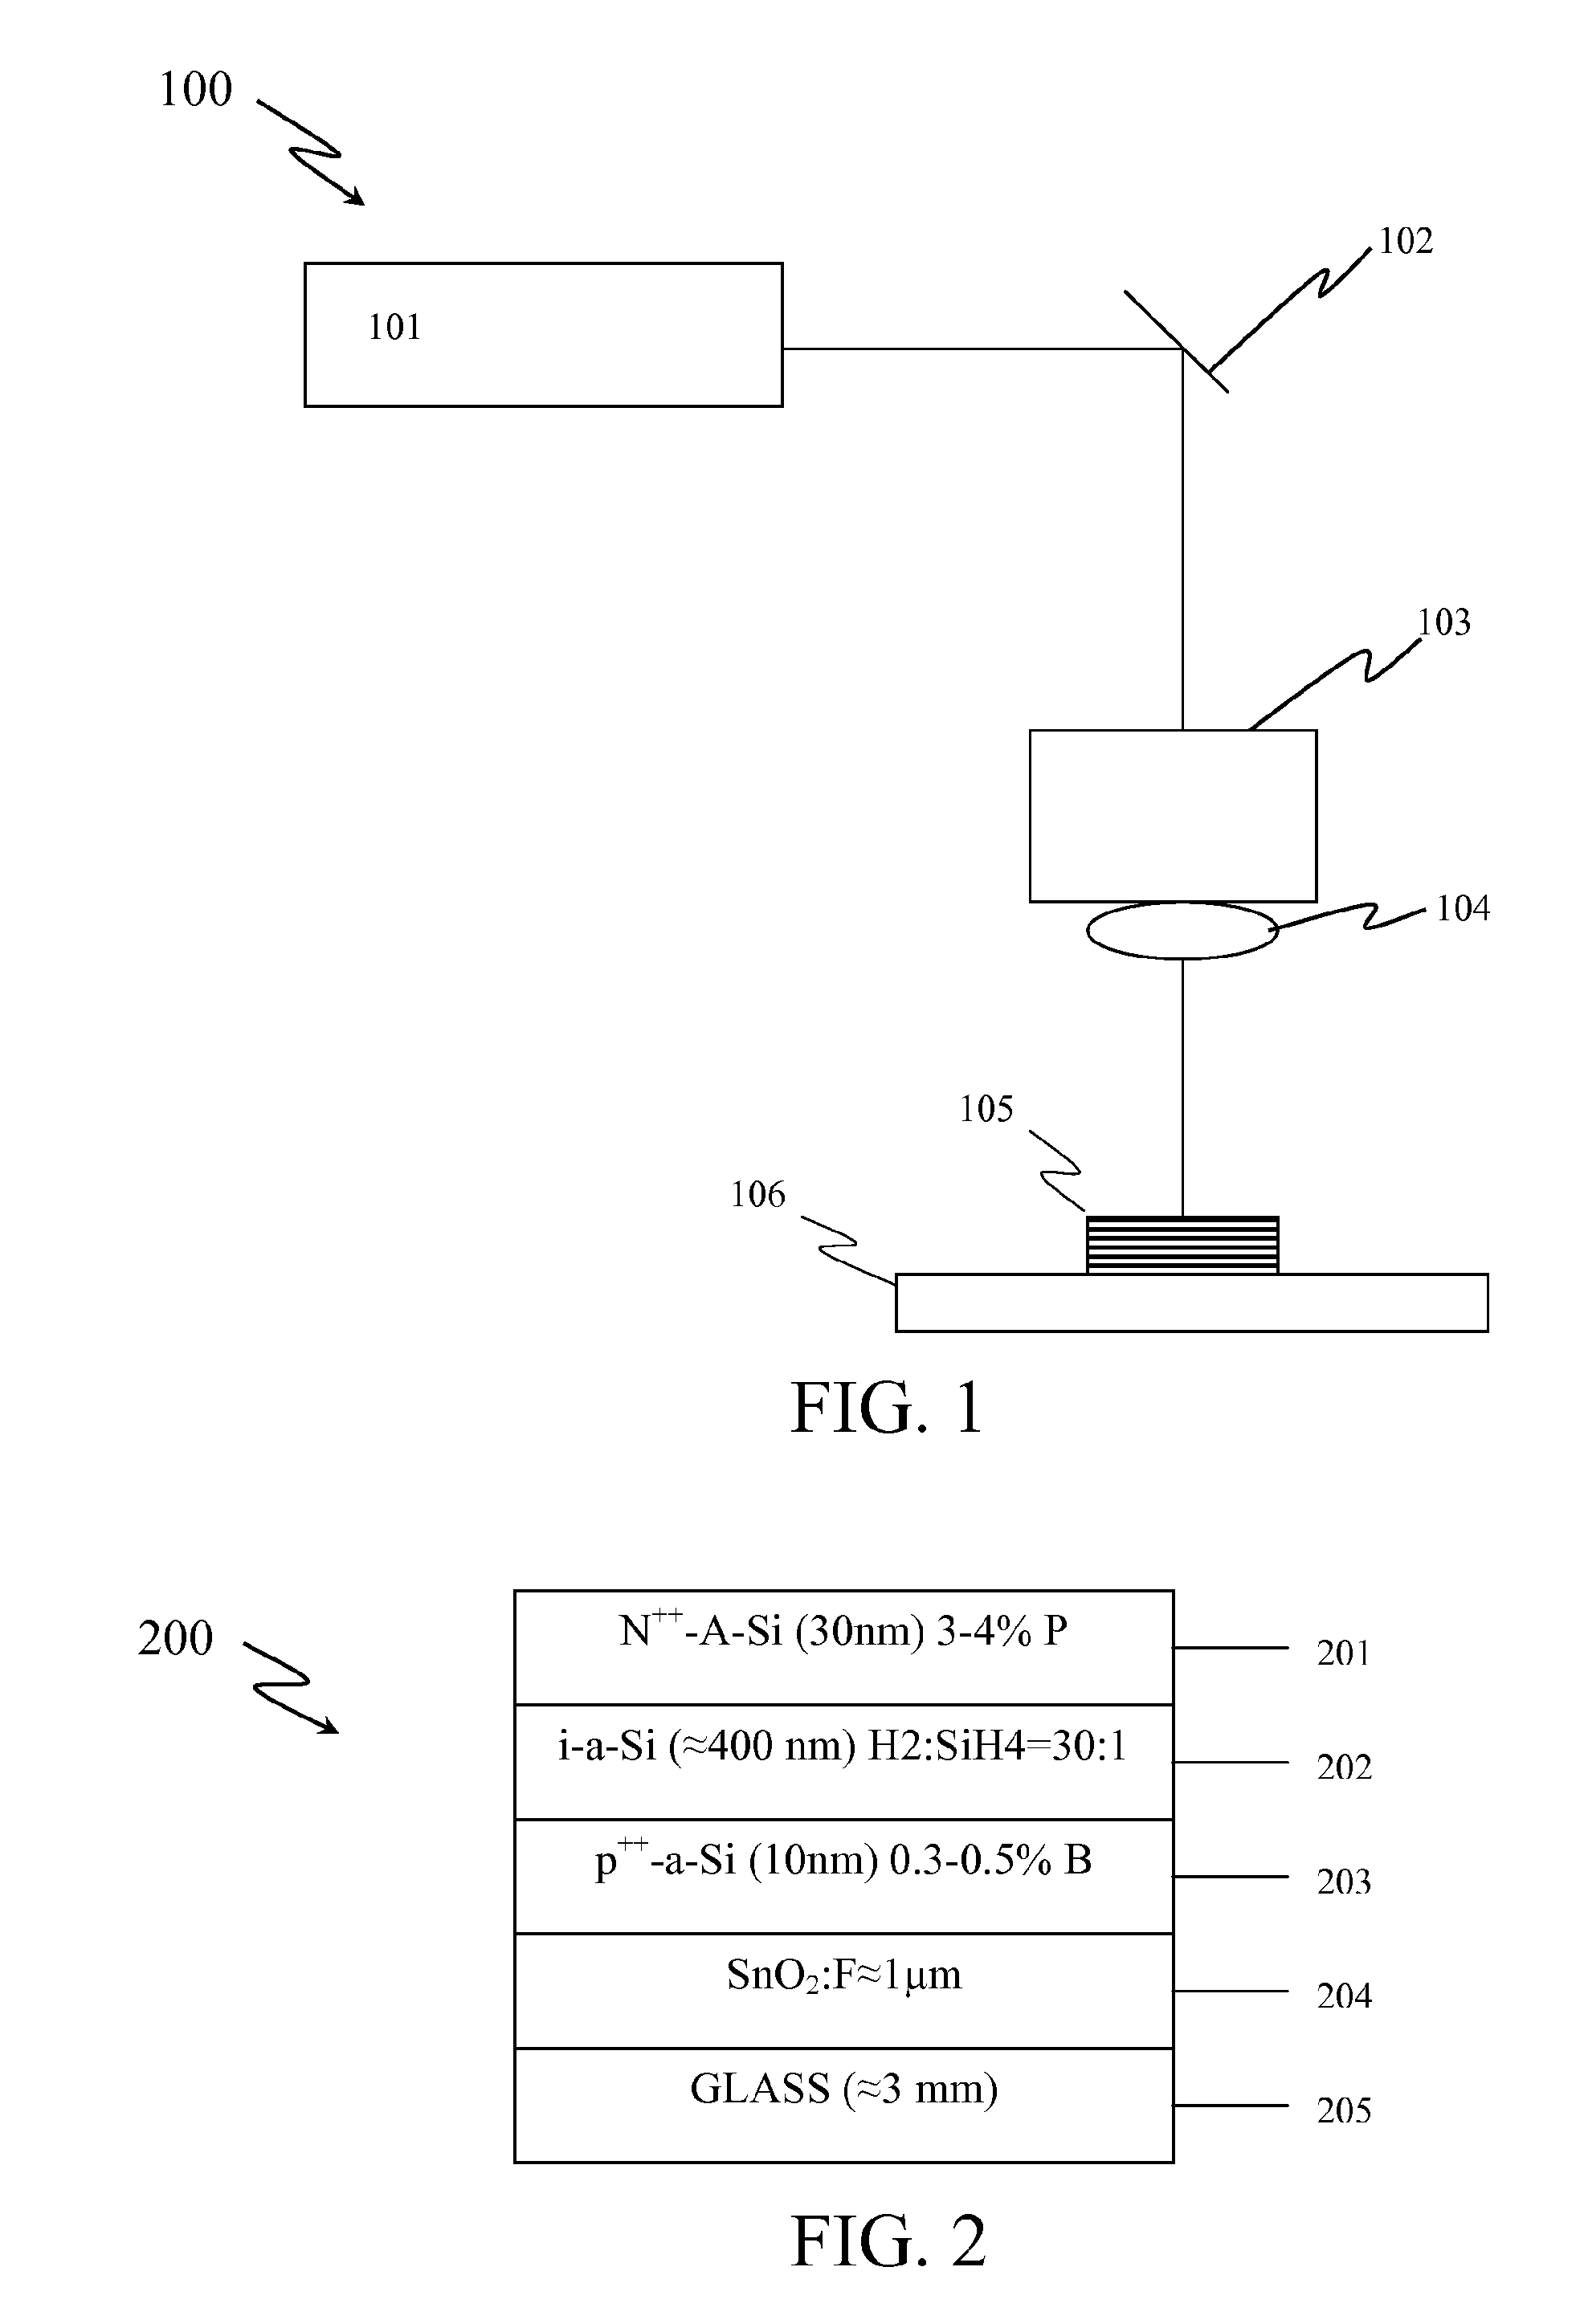 Systems and Methods of Laser Texturing of Material Surfaces and their Applications